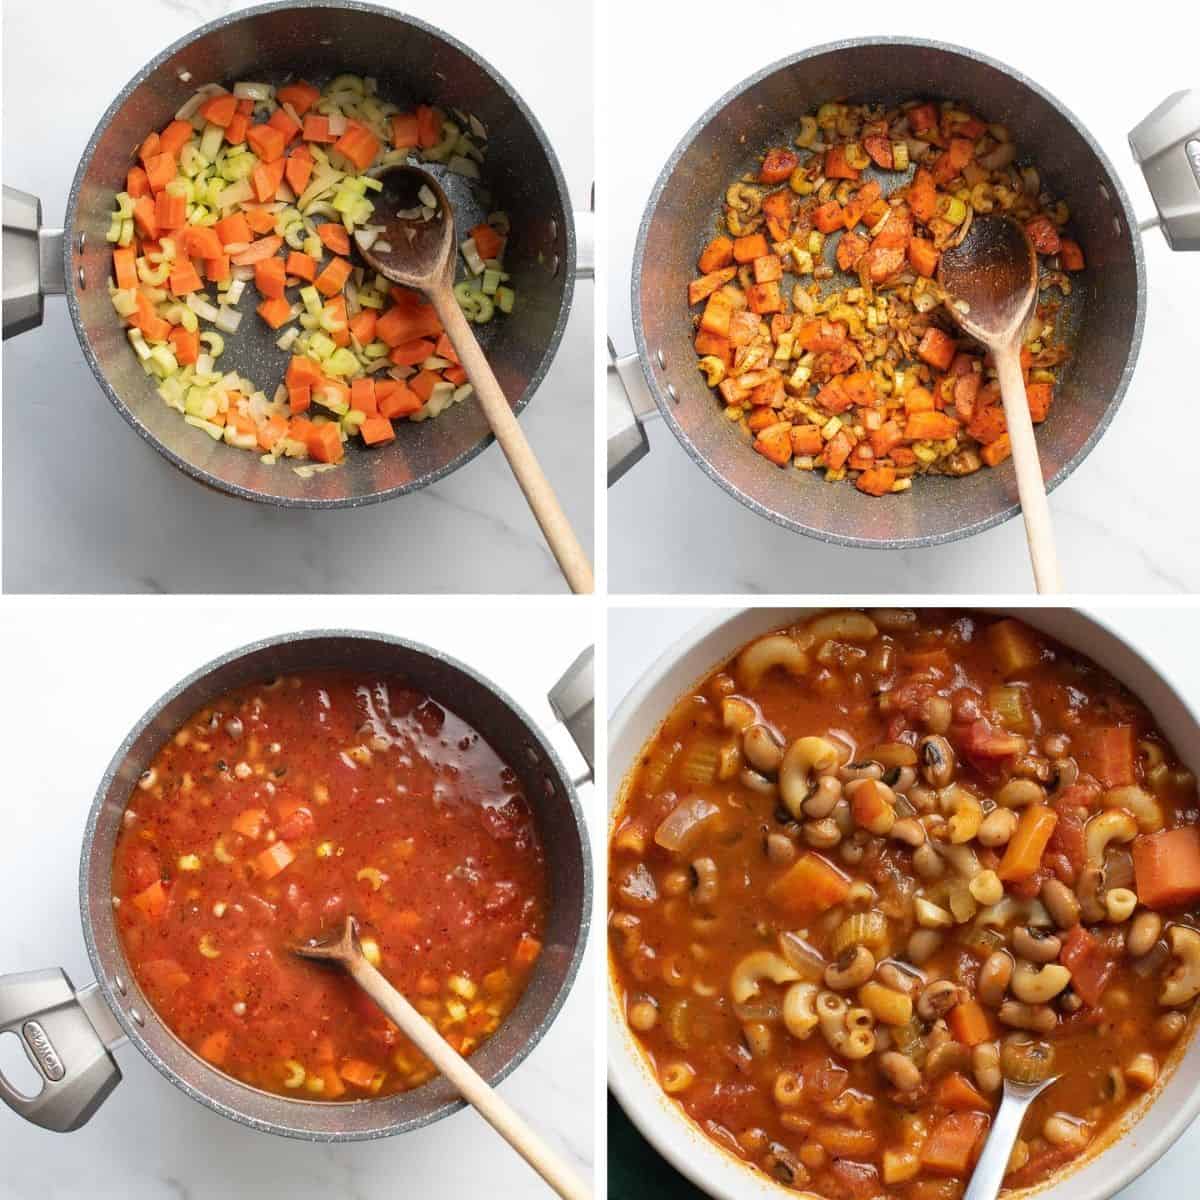 Step by step images showing how to make Black Eyed Pea Soup.